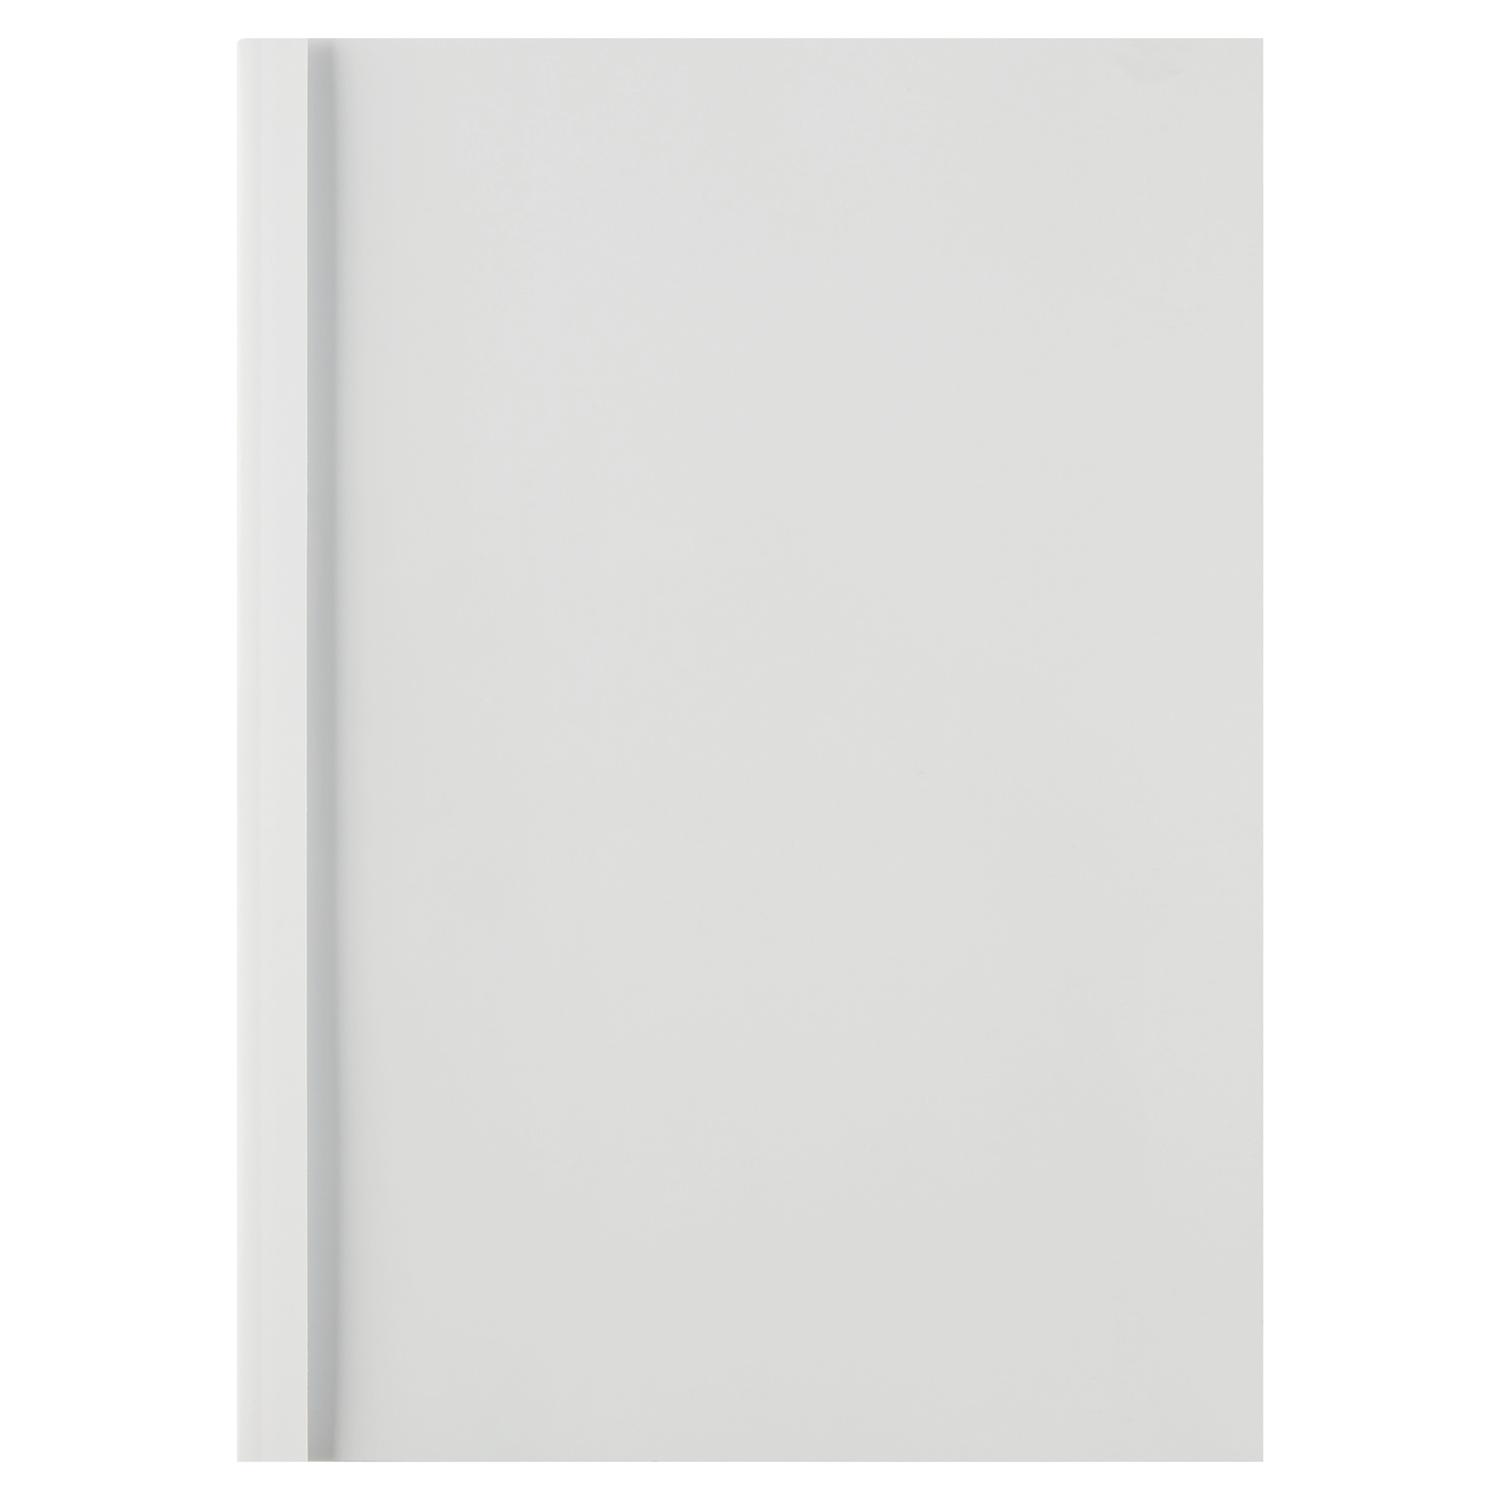 Thermal Bind Covers GBC Thermal Binding Cover A4 3mm Clear PVC Front White Silk Gloss Back (Pack 100)